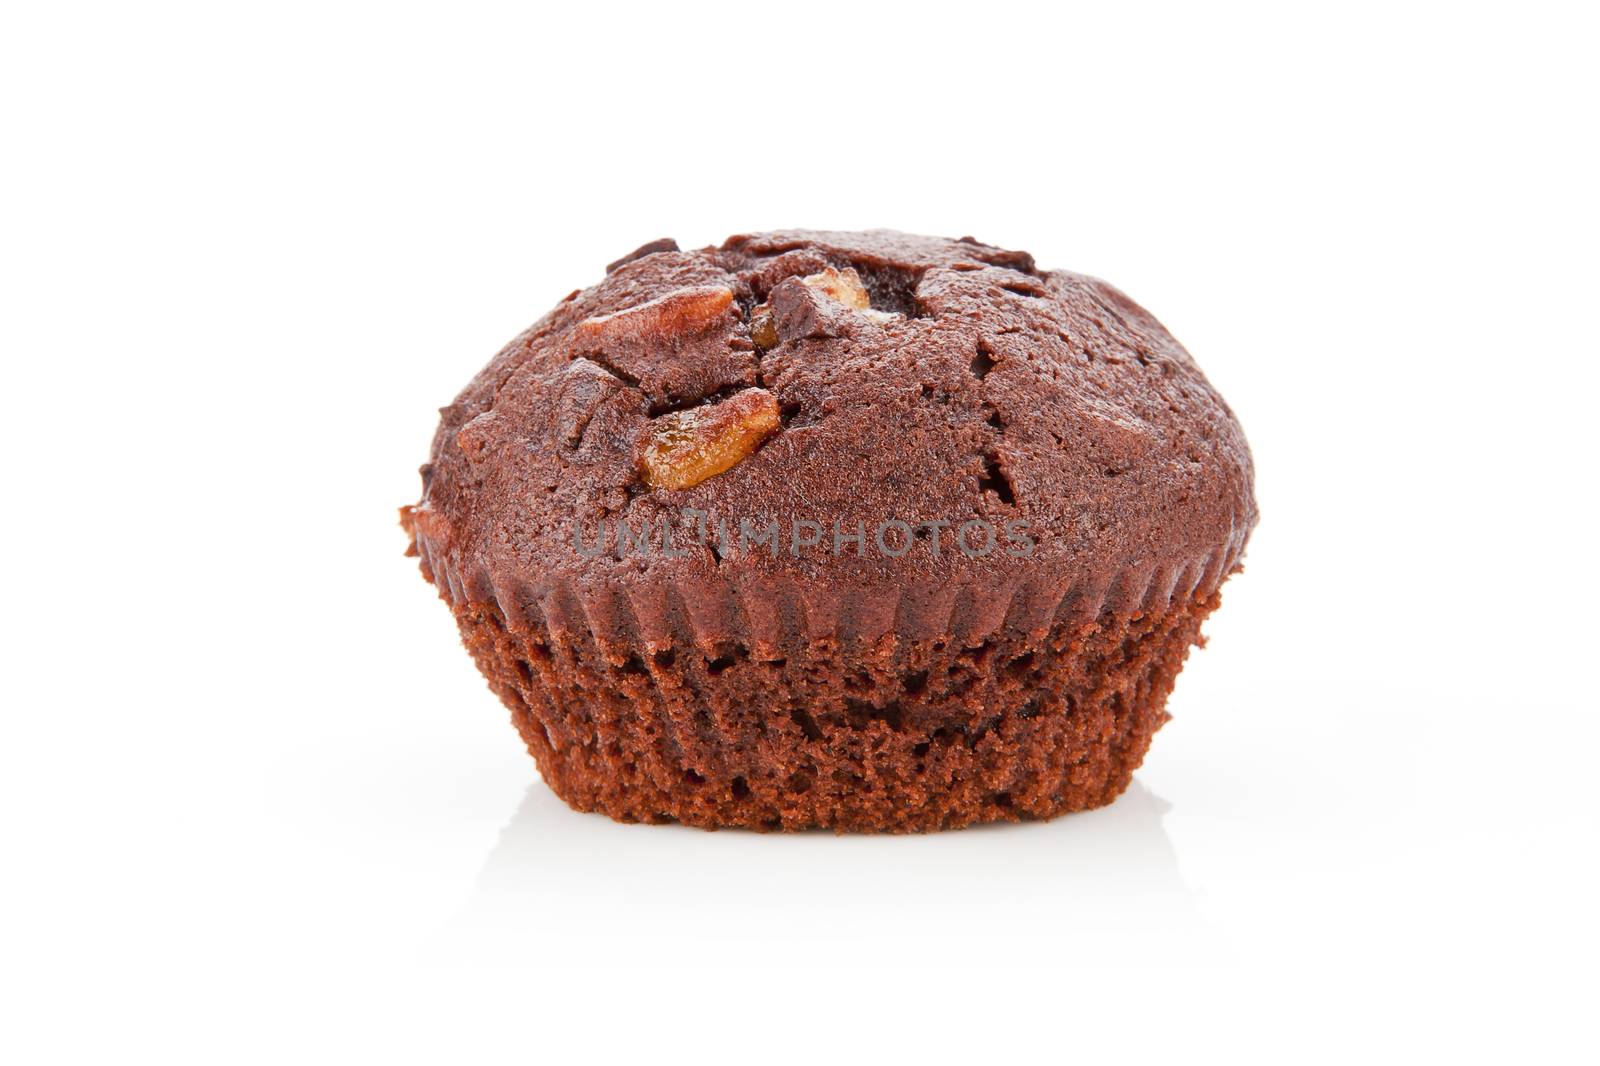 Delicious homemade chocolate muffin isolated on white background.